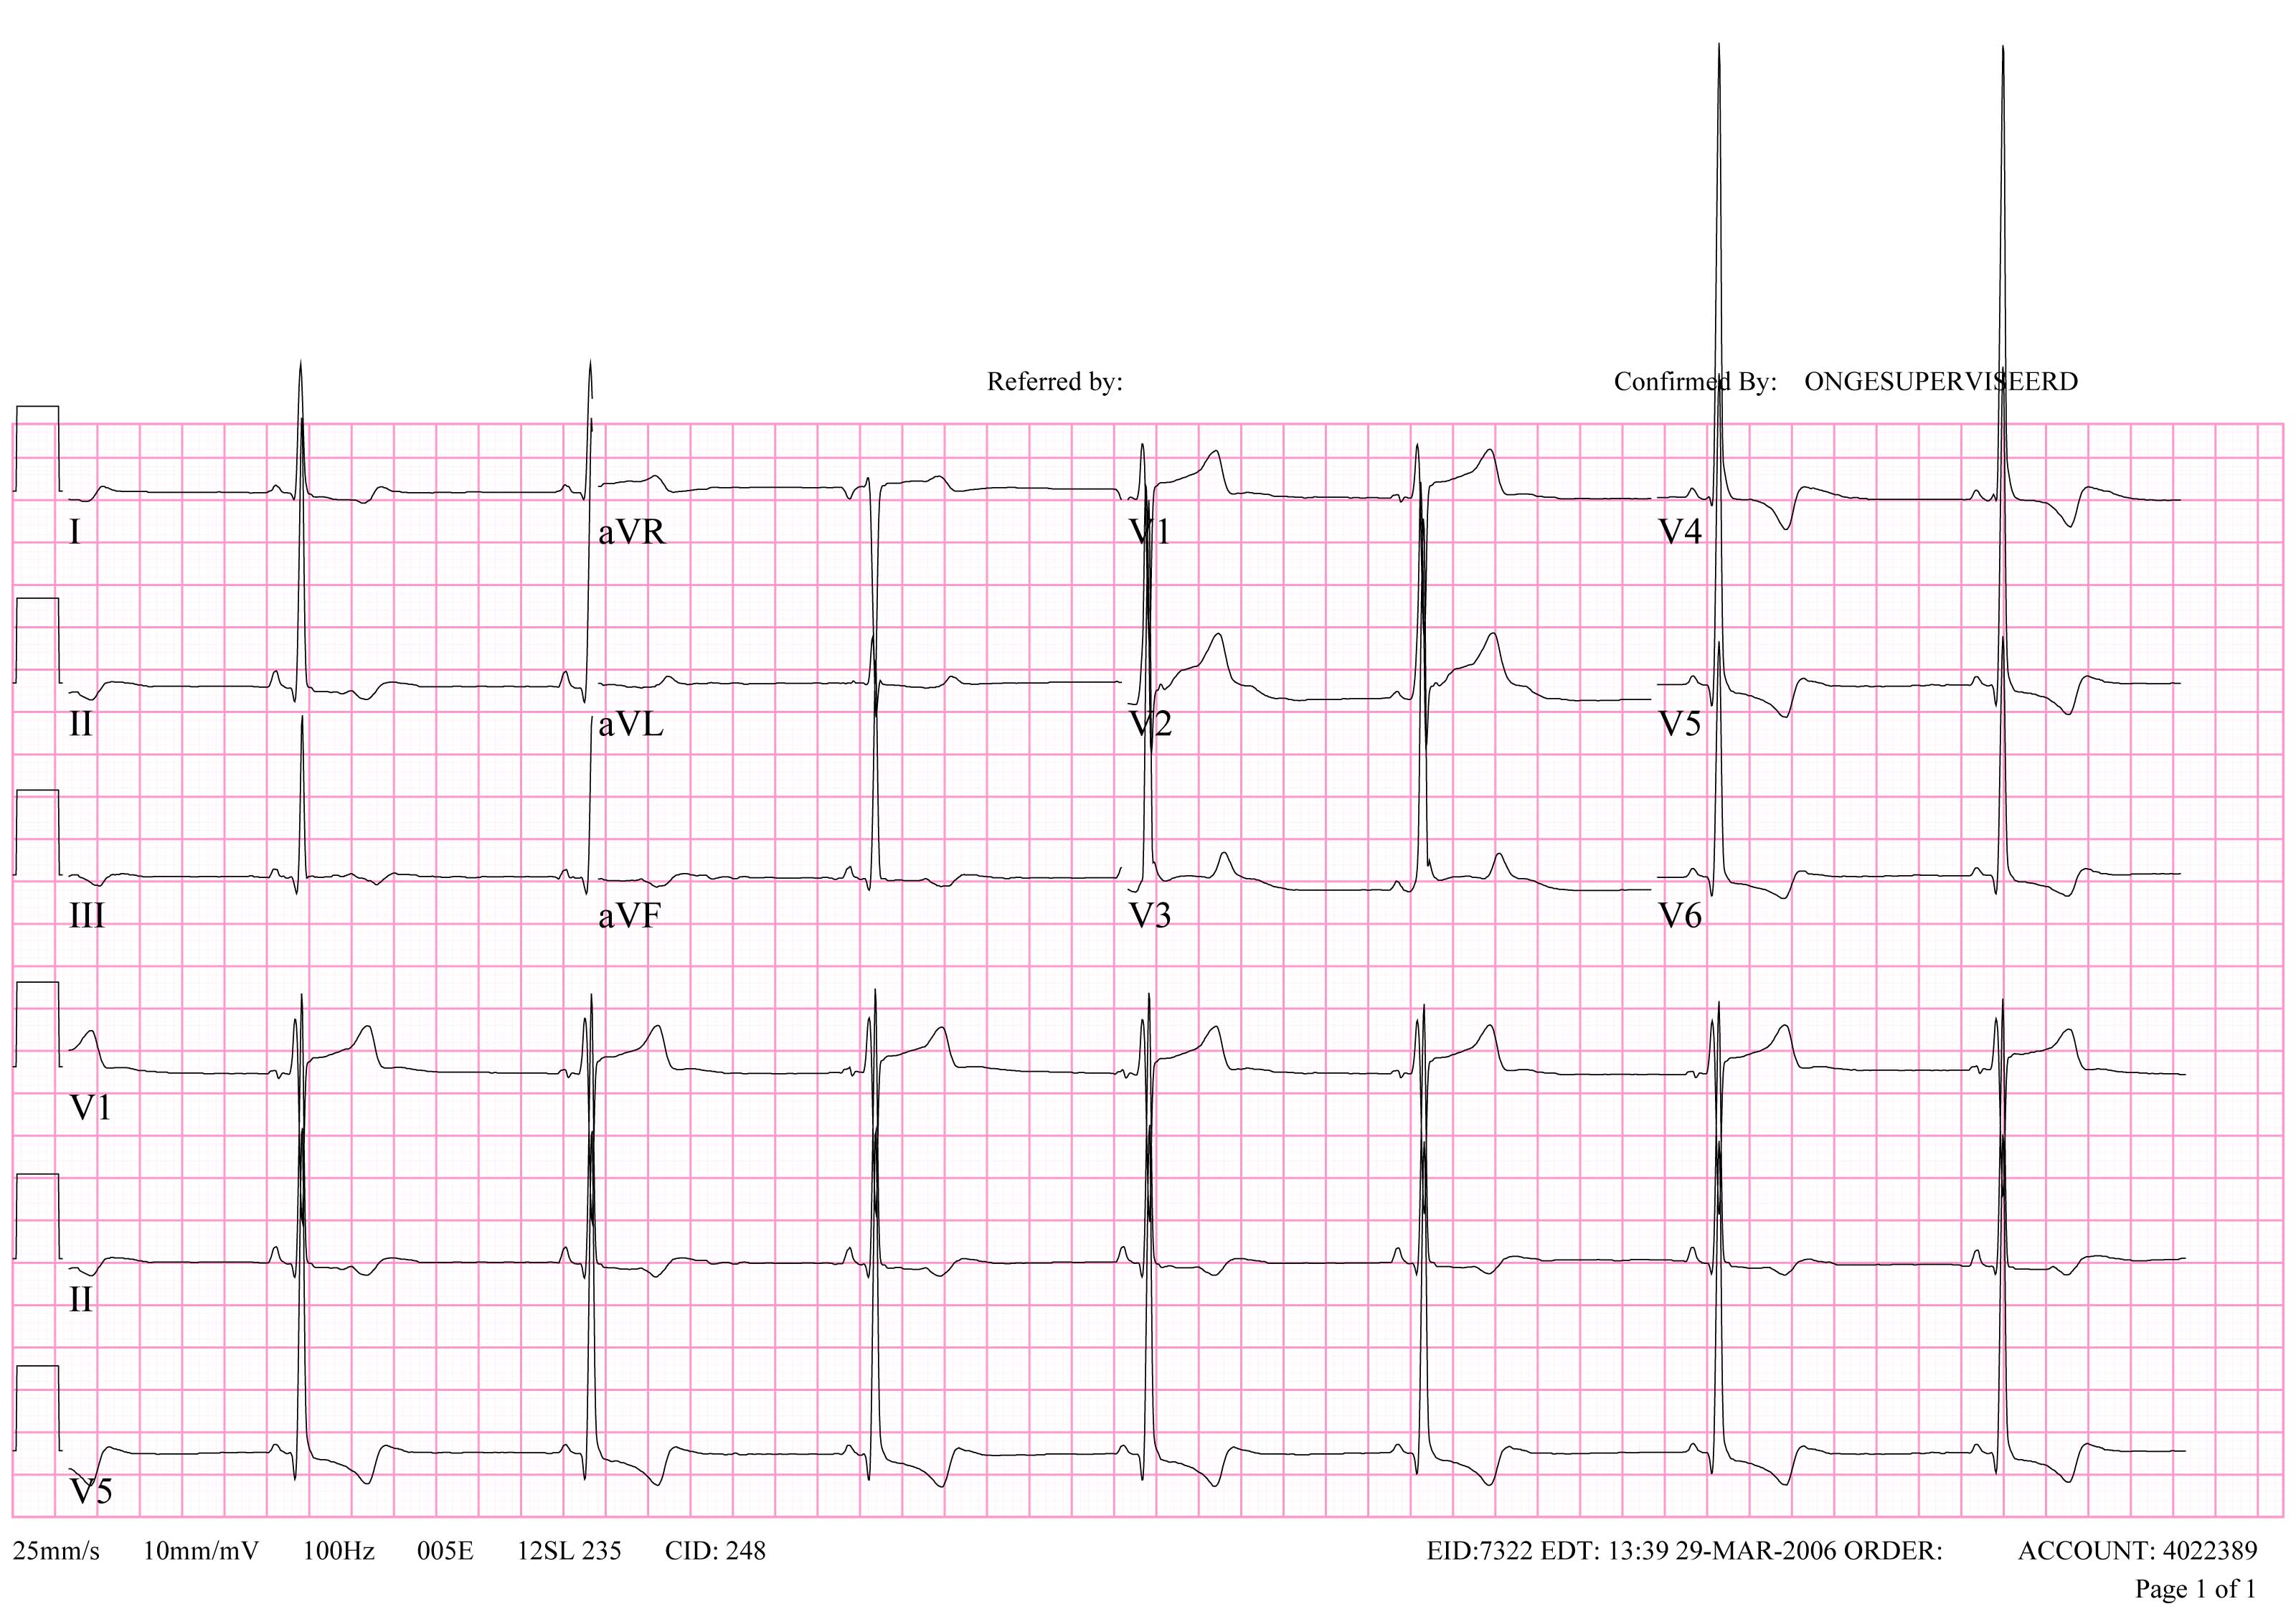 ECG of patient with left ventricular hypertrophy according to the Sokolow-Lyon criteria